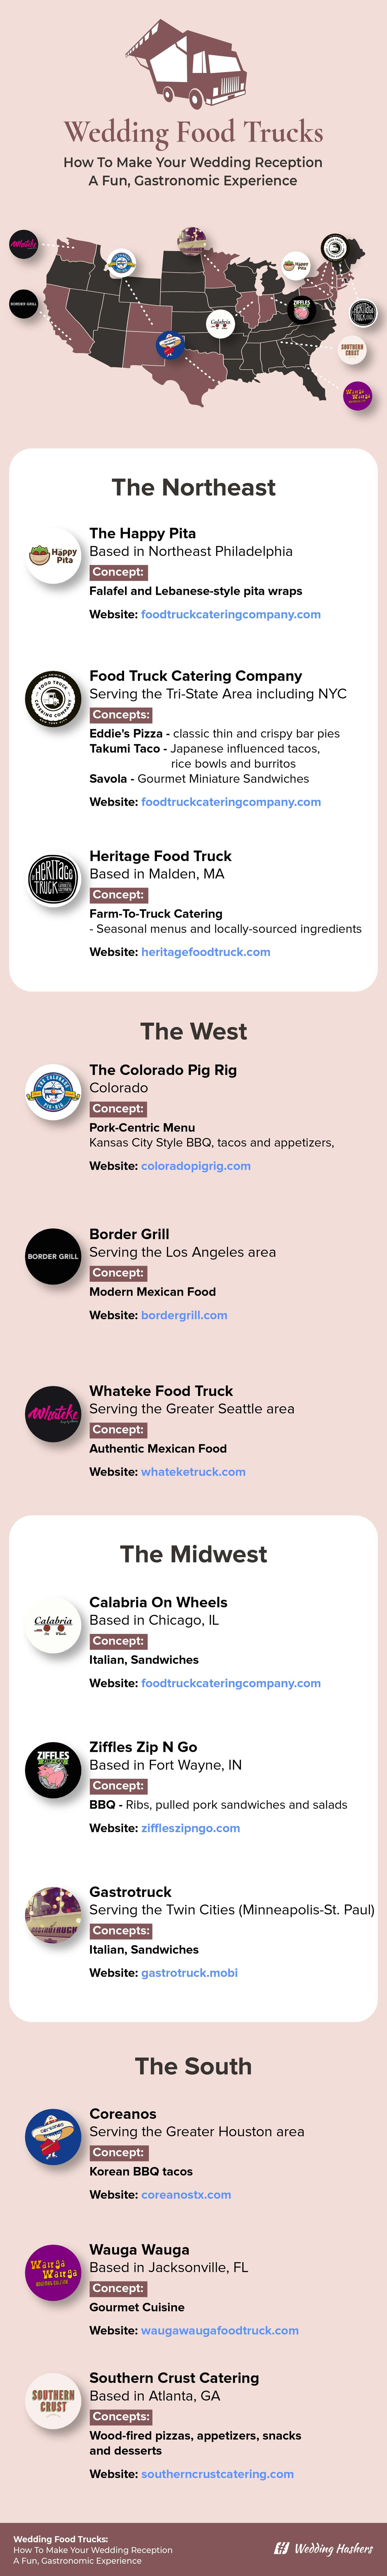 Infographic showing some of the most popular wedding food trucks in America 